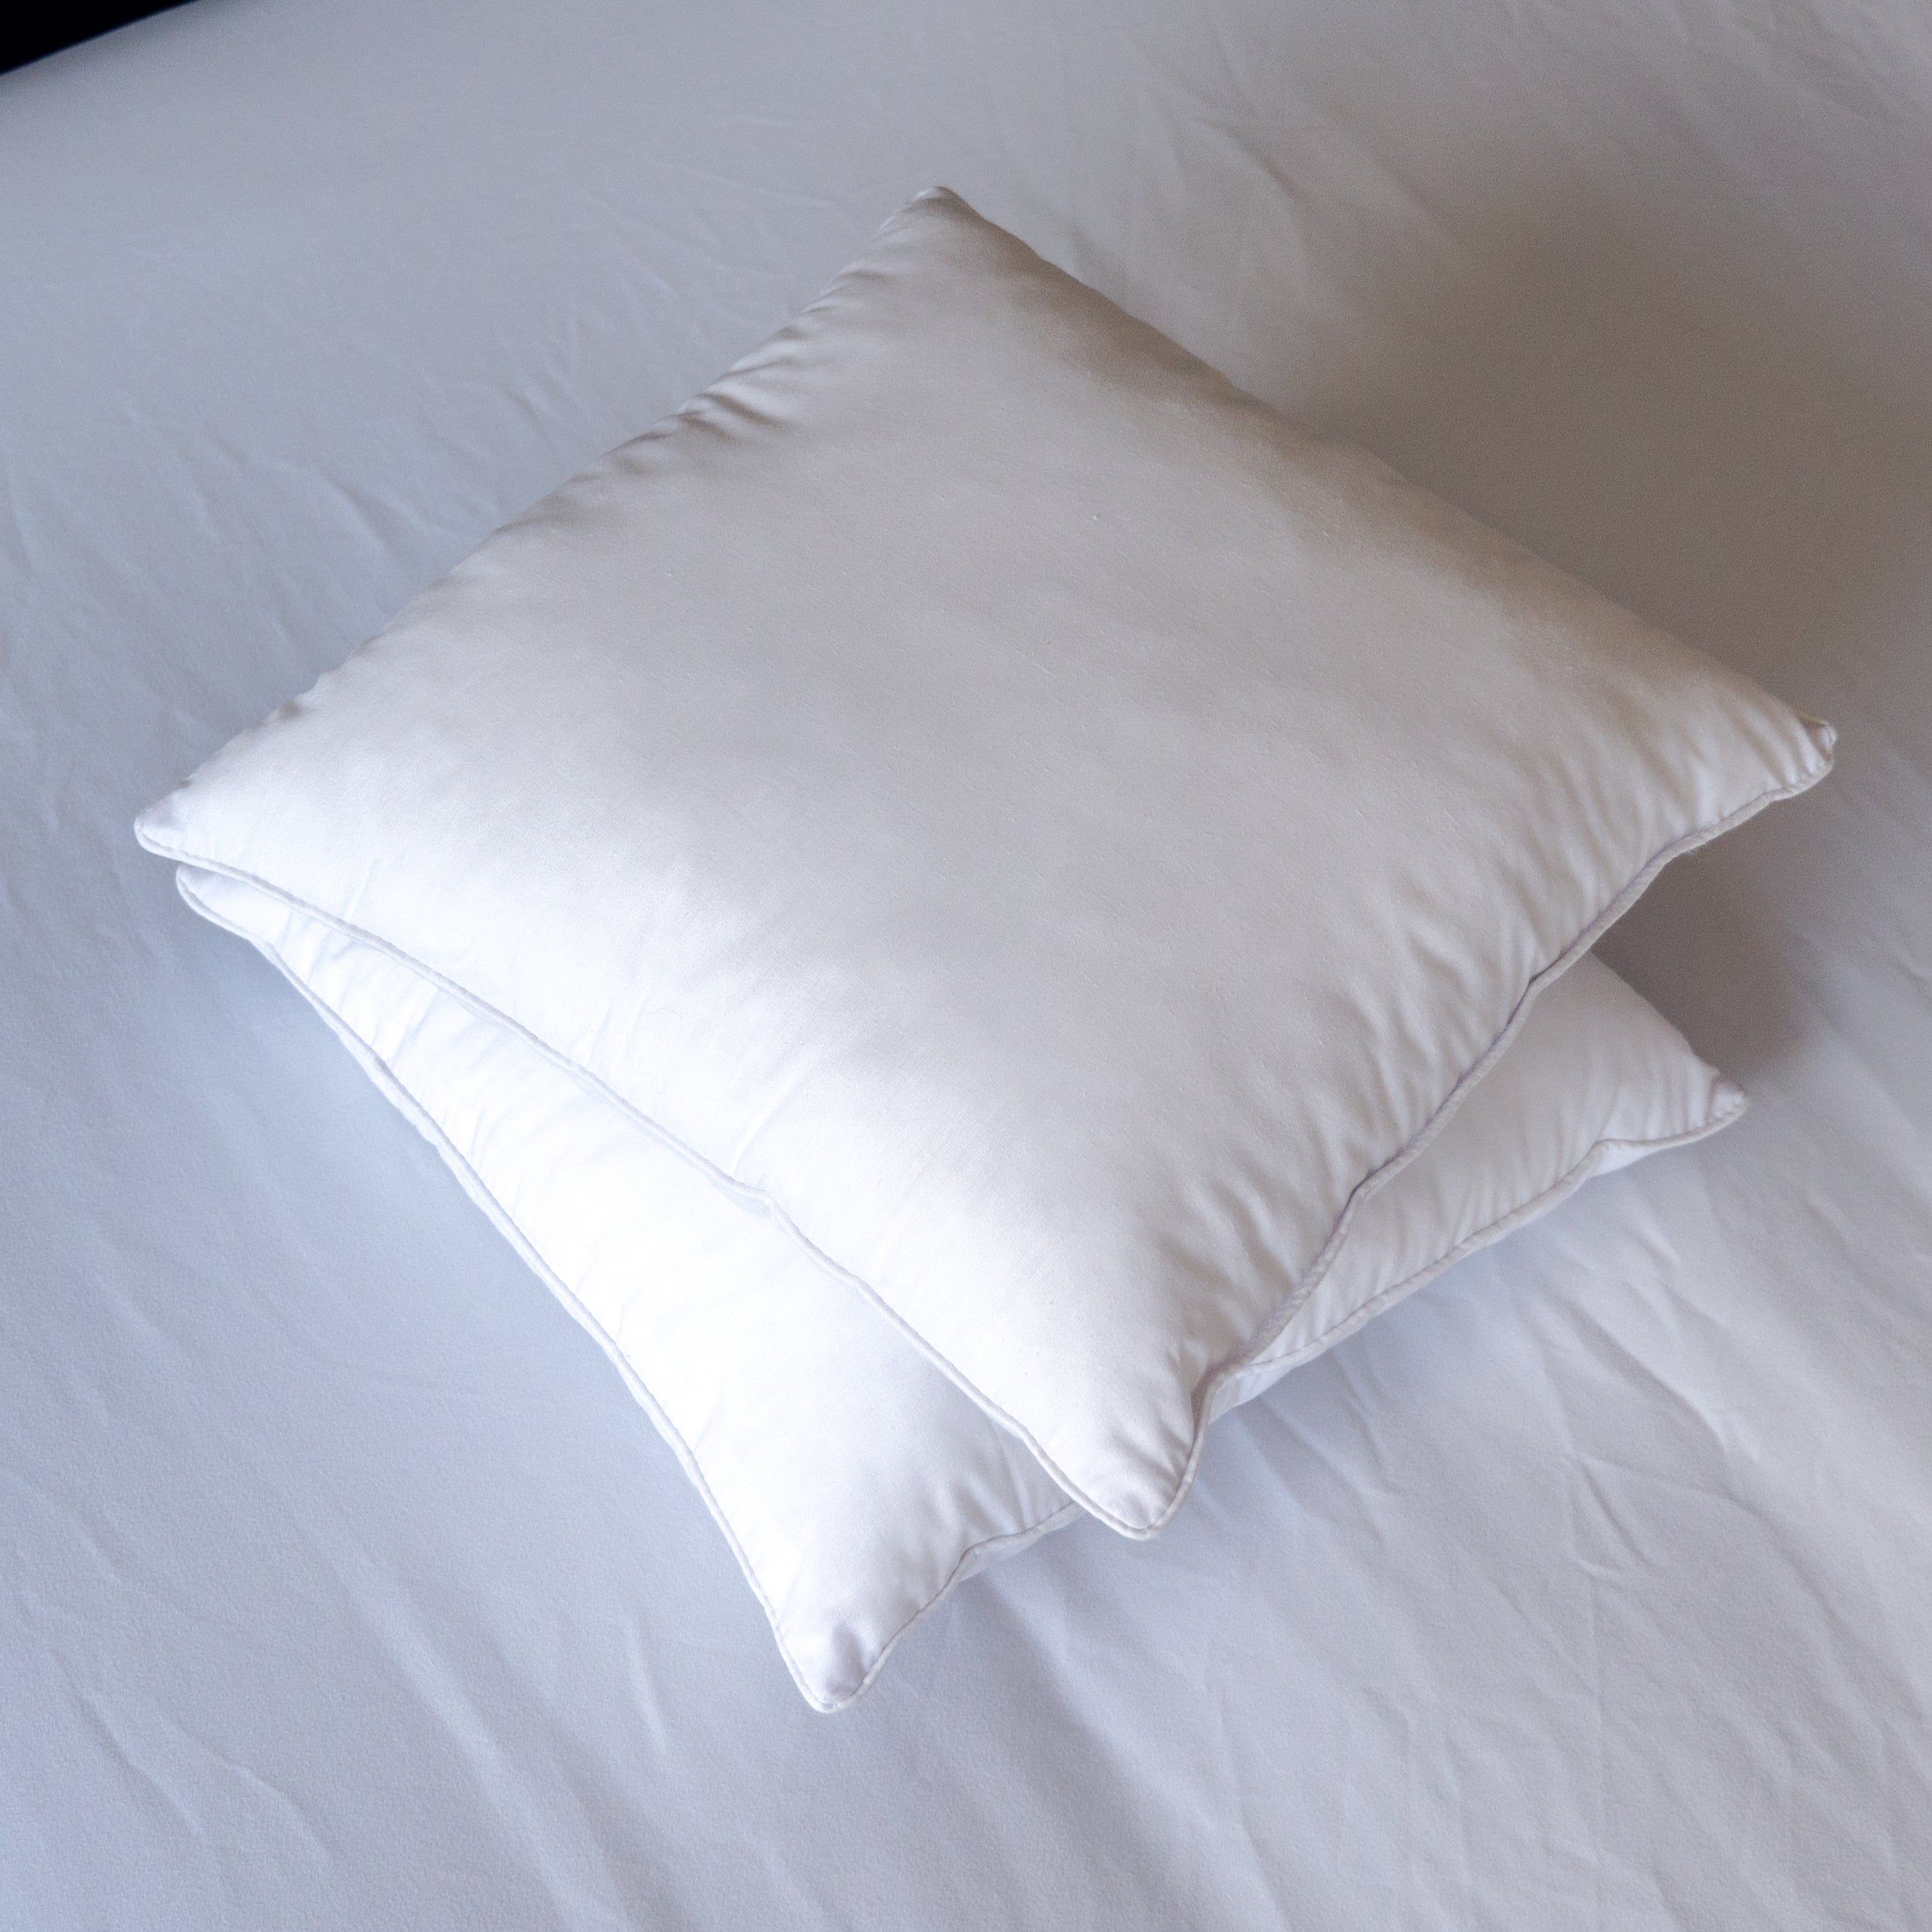 Duck Feather and Down Pillow Inserts 18x18 inch Set of 2